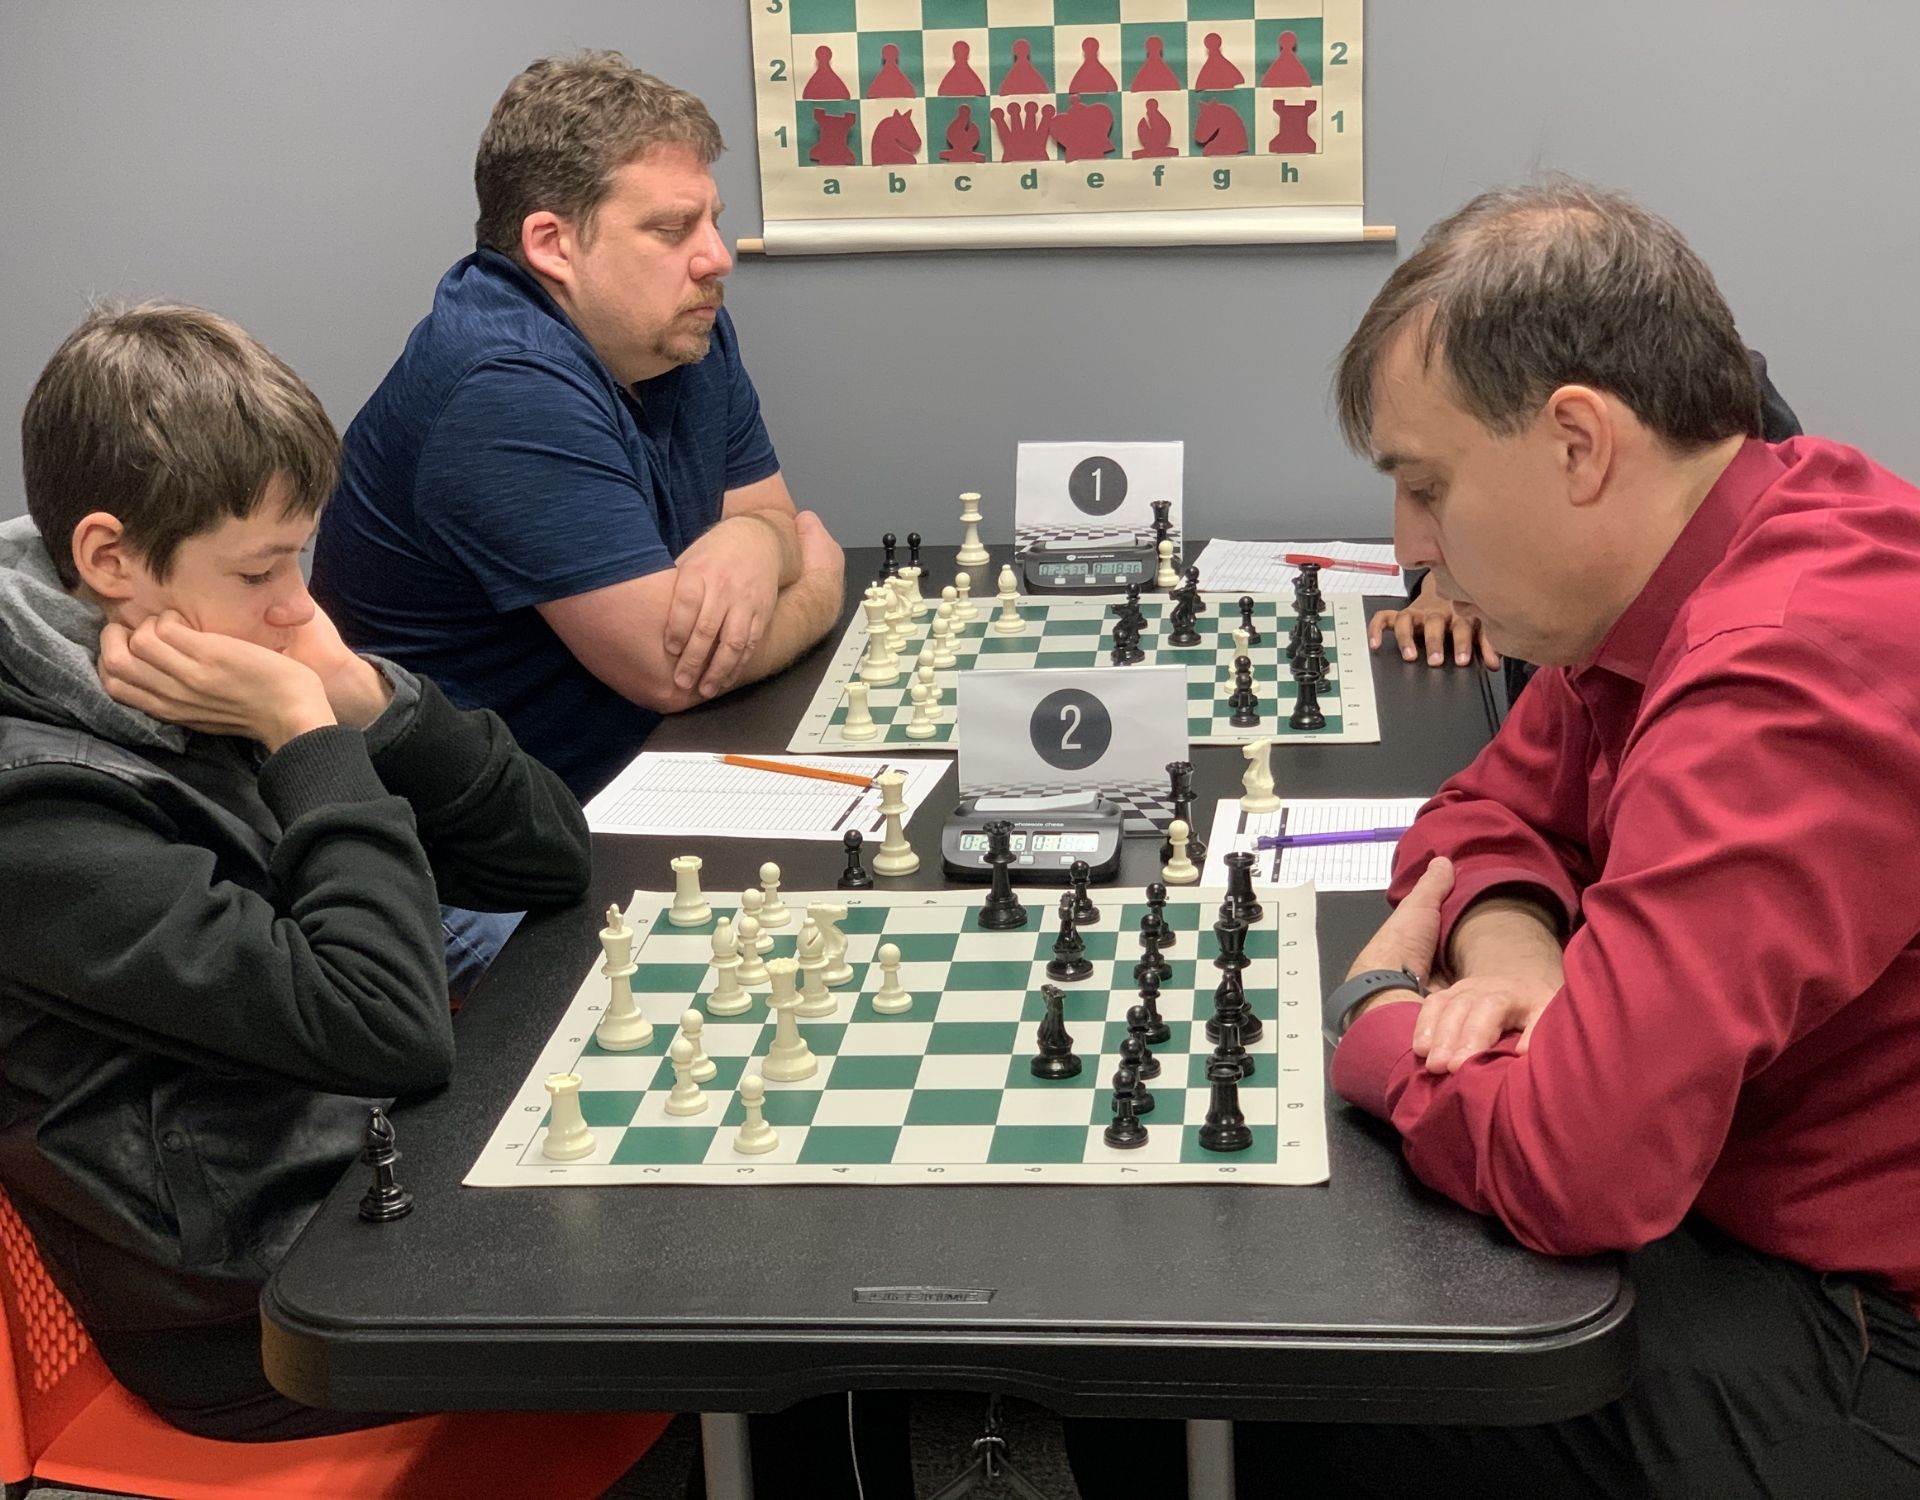 Pricing Plans for Private Chess Coaching